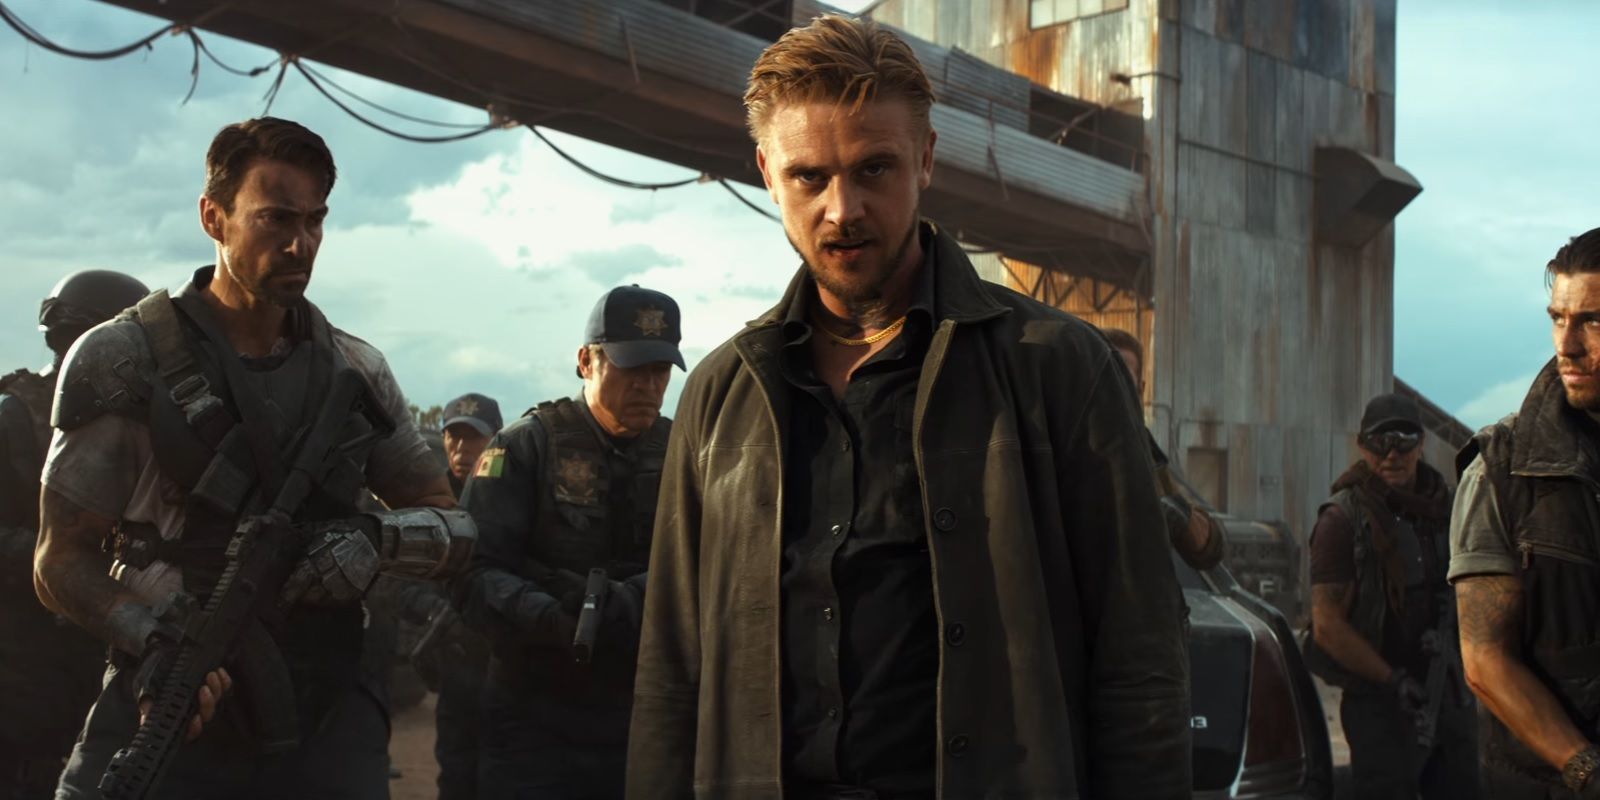 Boyd Holbrook as Donald Pierce with the Reavers in 